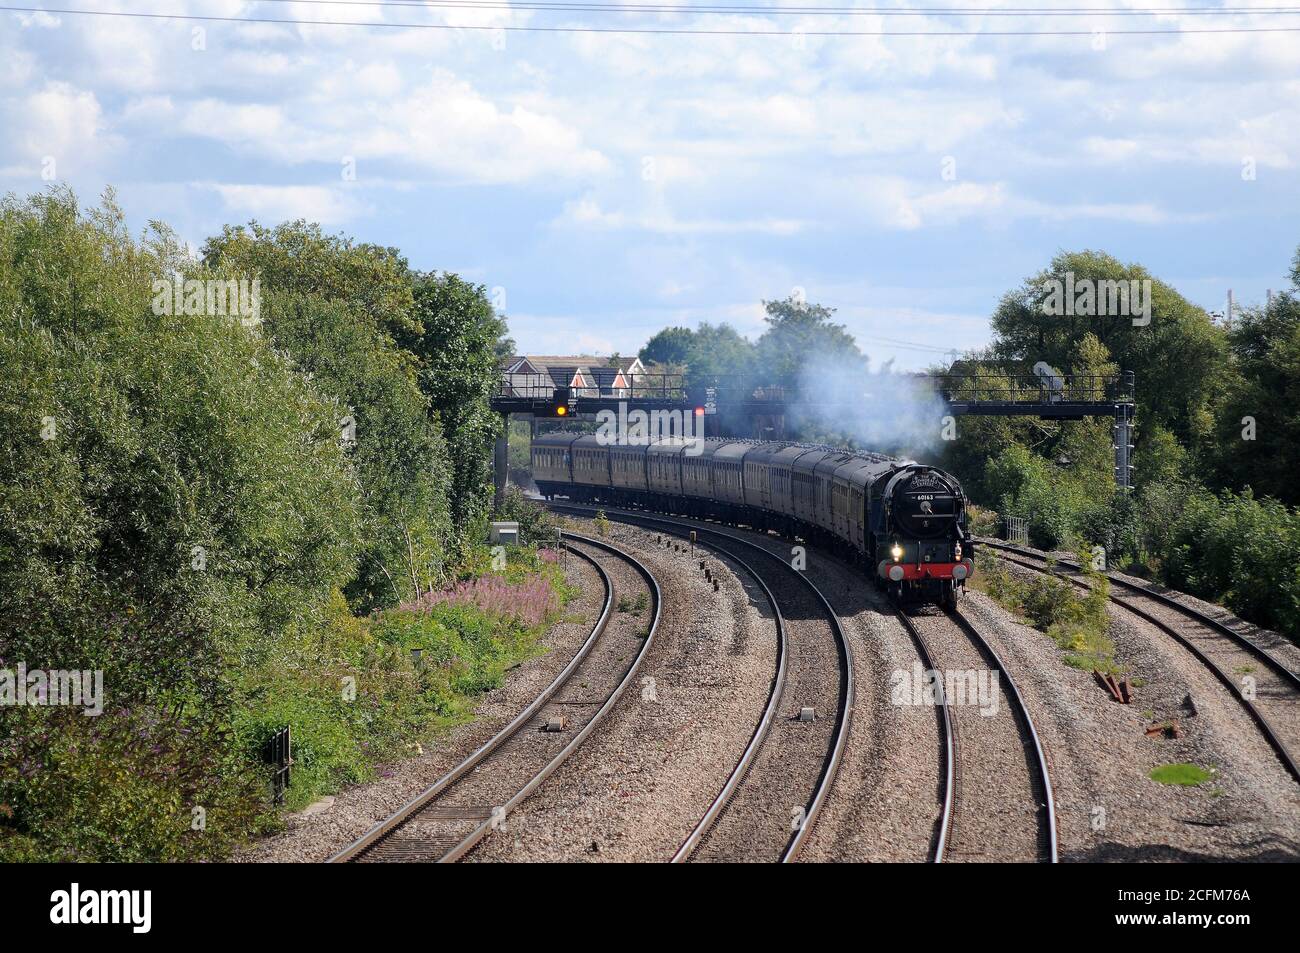 60163 'Tornado' westbound at Magor with a 'Cathedrals Express' for Cardiff Central. Stock Photo